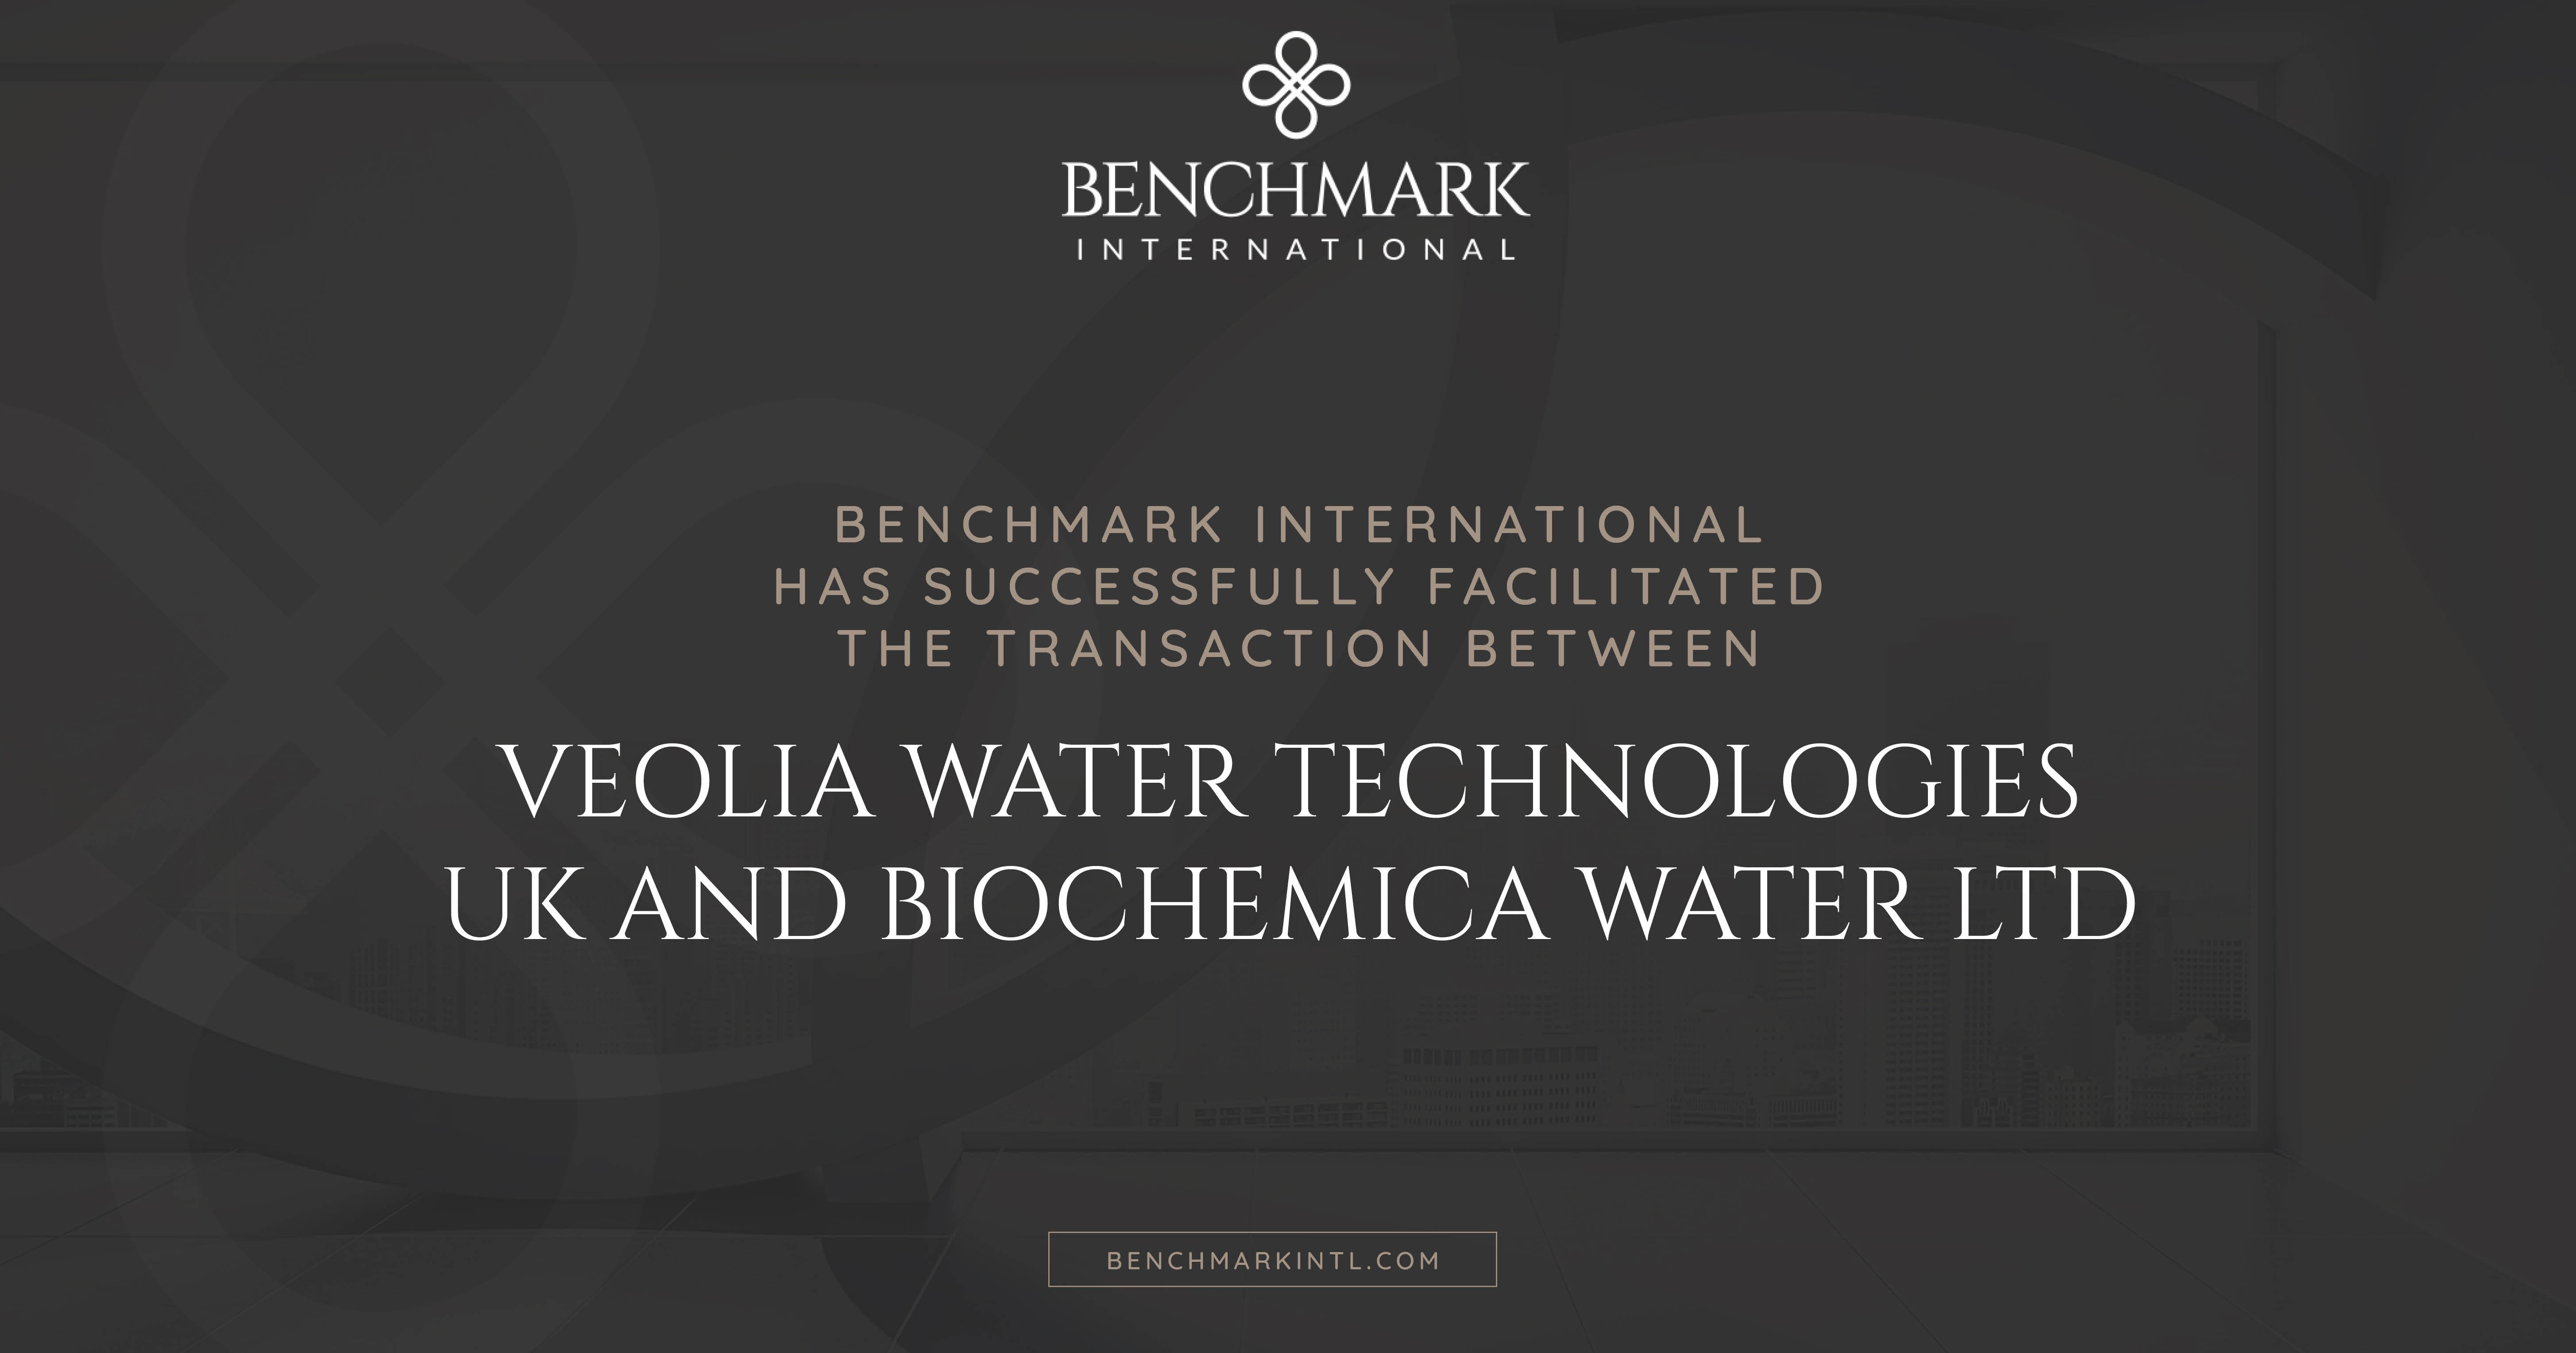 Benchmark International has Successfully Facilitated the Transaction Between Veolia Water Technologies UK and Biochemica Water Ltd